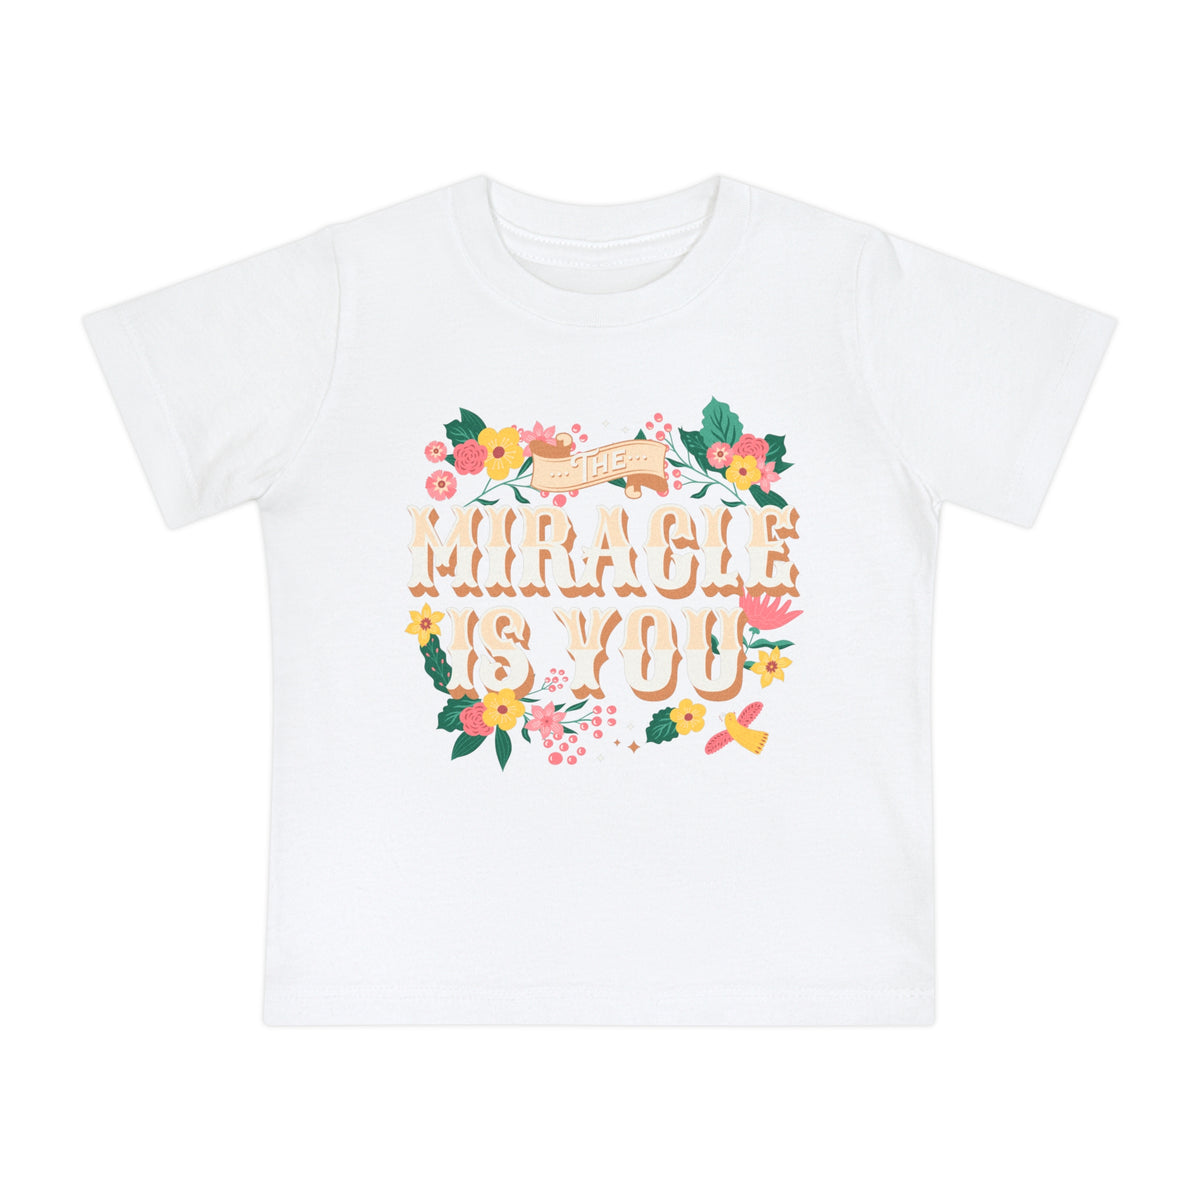 The Miracle Is You Bella Canvas Baby Short Sleeve T-Shirt